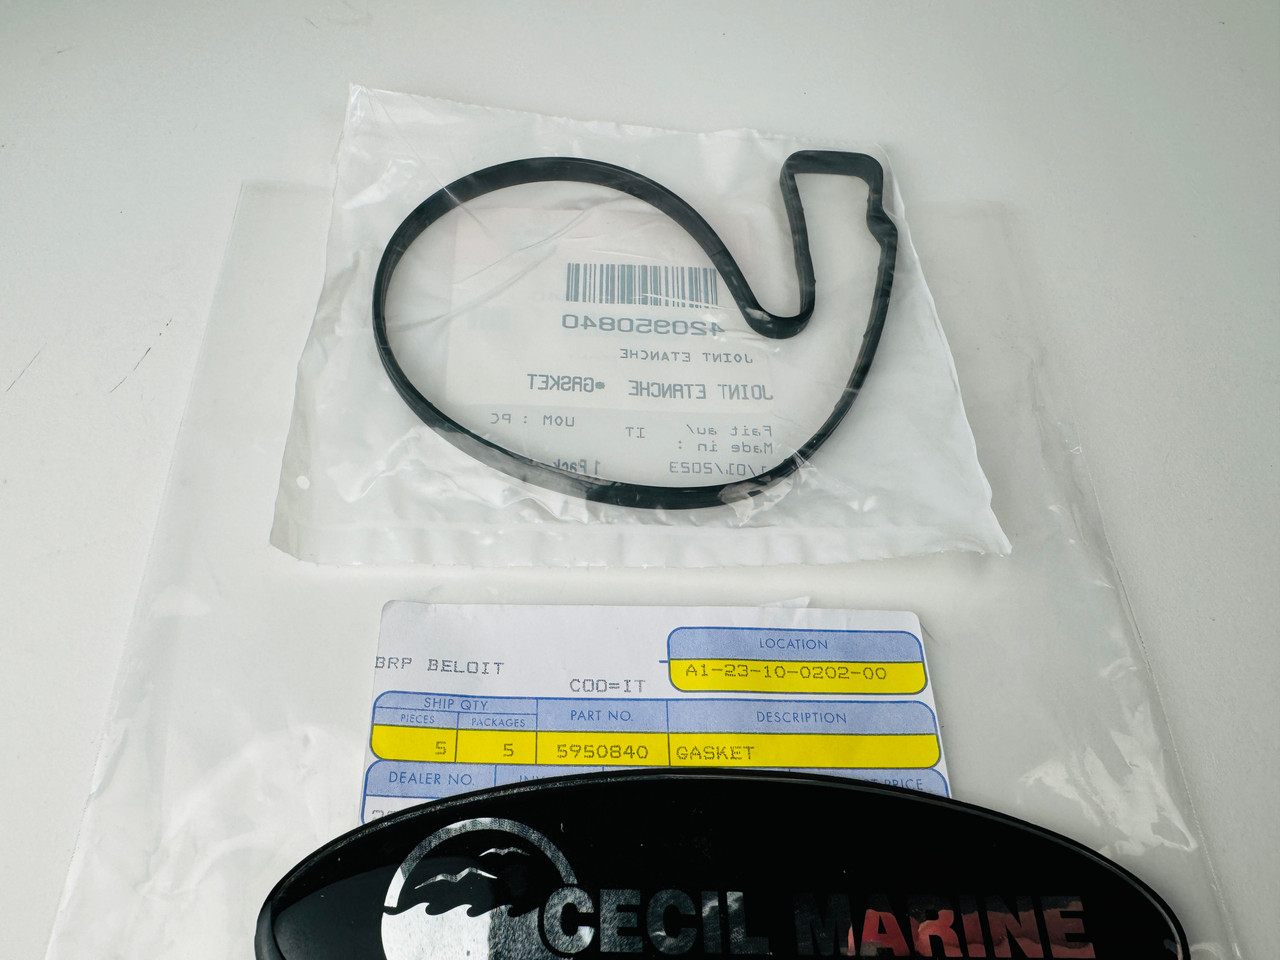 $14.99* GENUINE BRP no tax* GASKET 5950840 *In Stock & Ready To Ship!